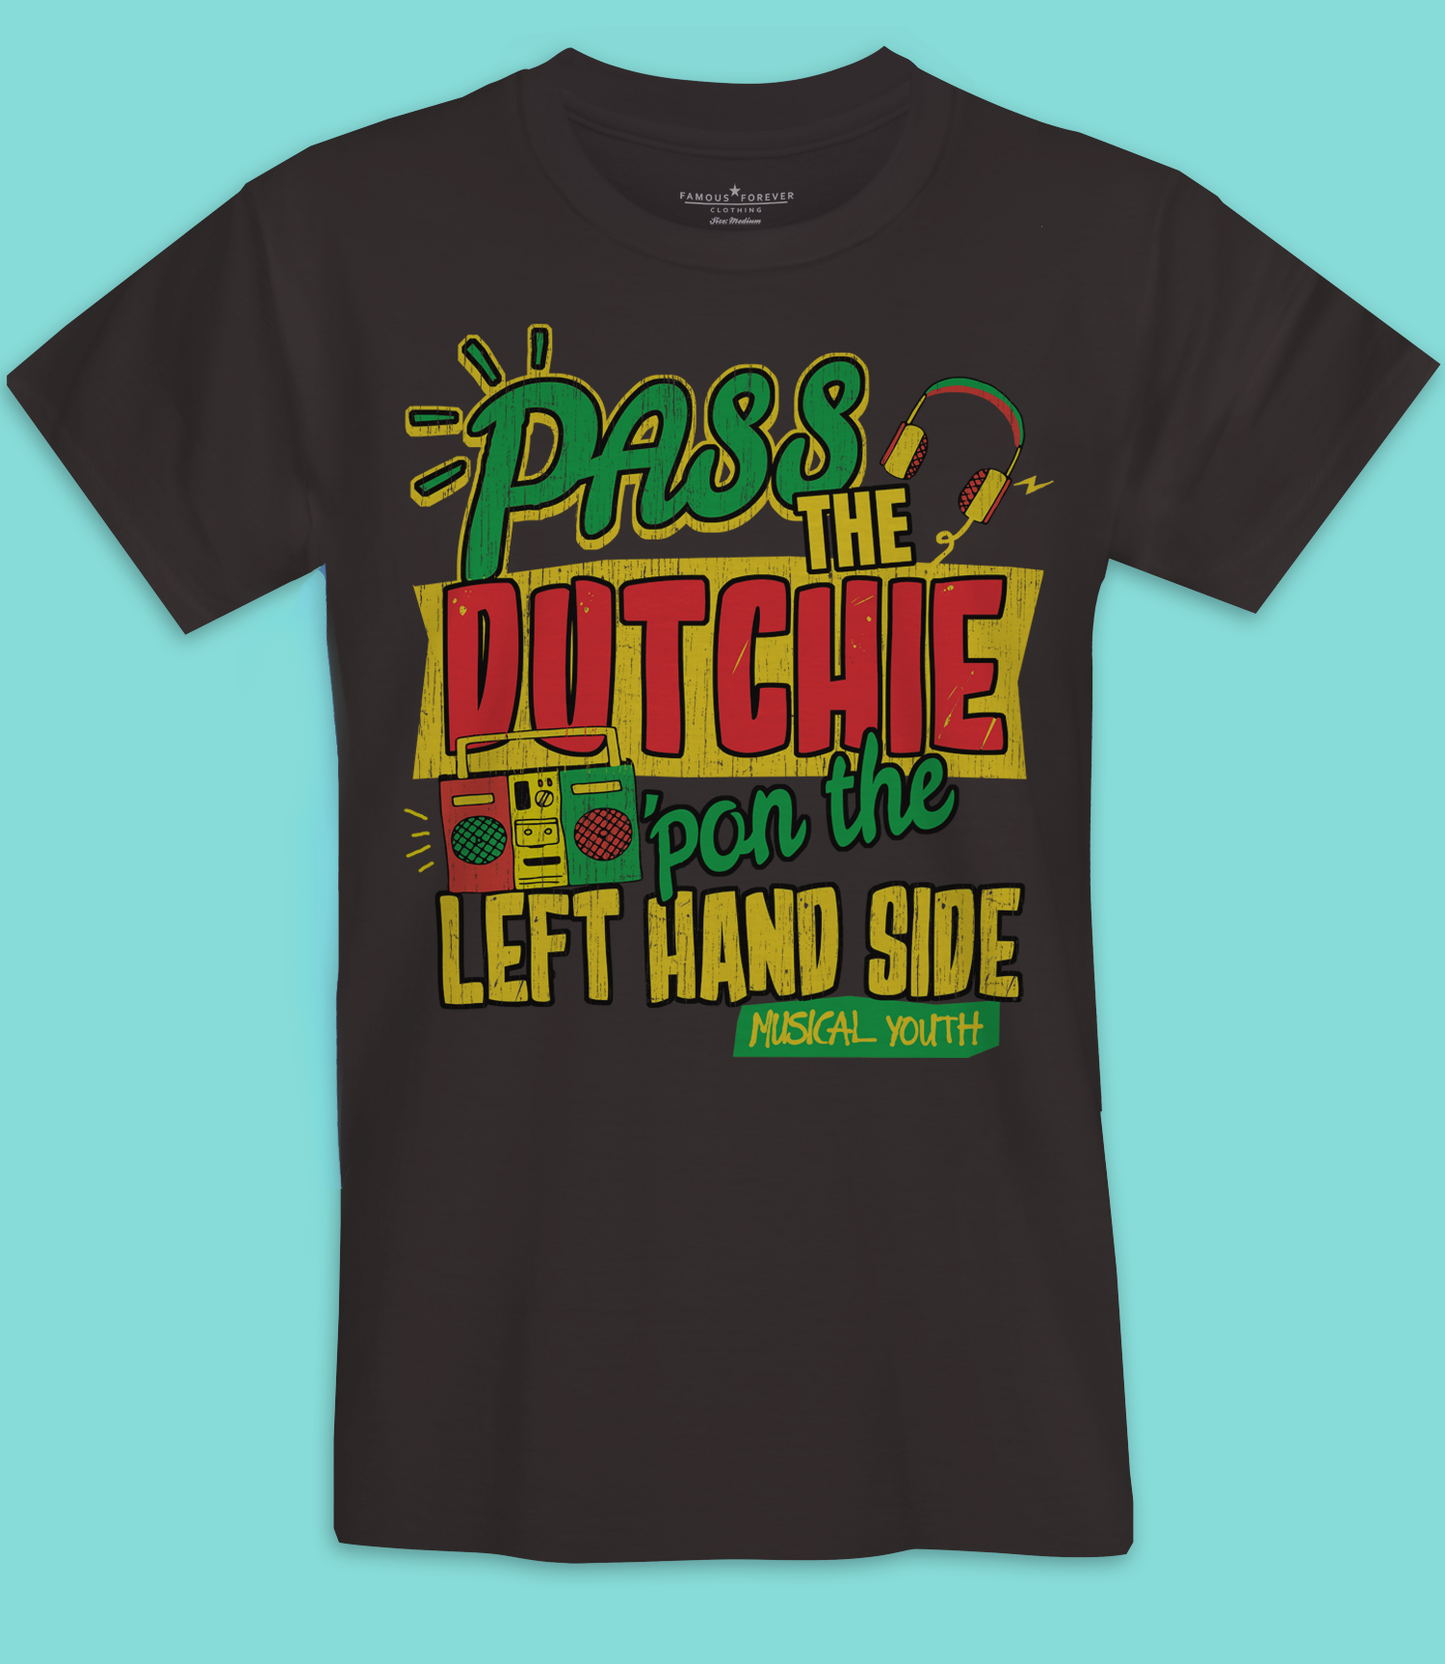 Musical Youth Pass The Dutchie 'pon The Left Hand Side T-shirt Men's Unisex